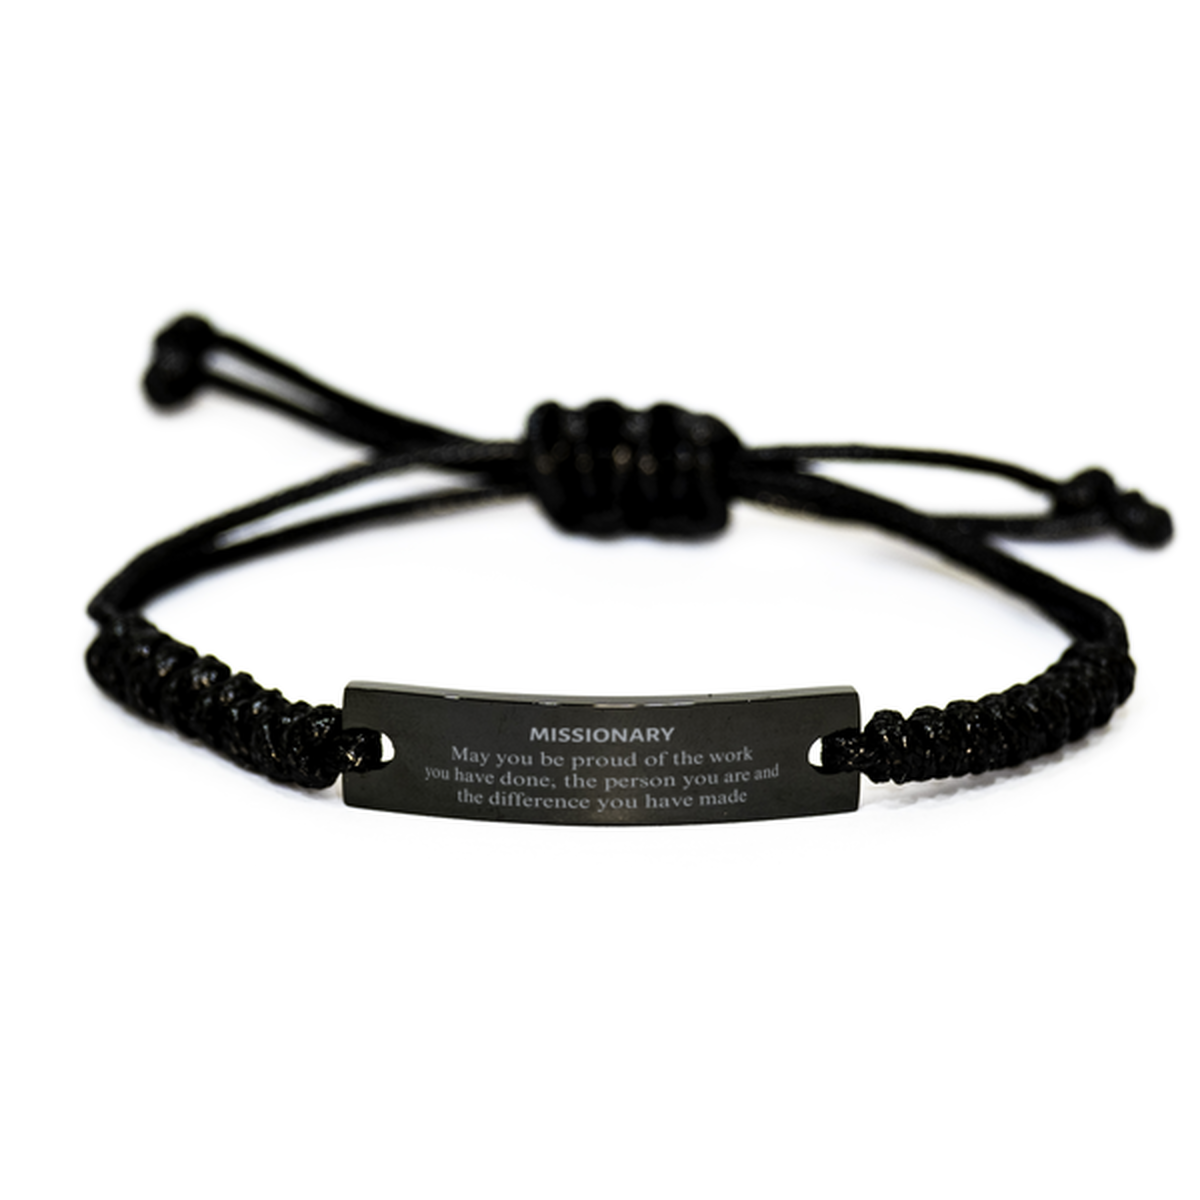 Missionary May you be proud of the work you have done, Retirement Missionary Black Rope Bracelet for Colleague Appreciation Gifts Amazing for Missionary